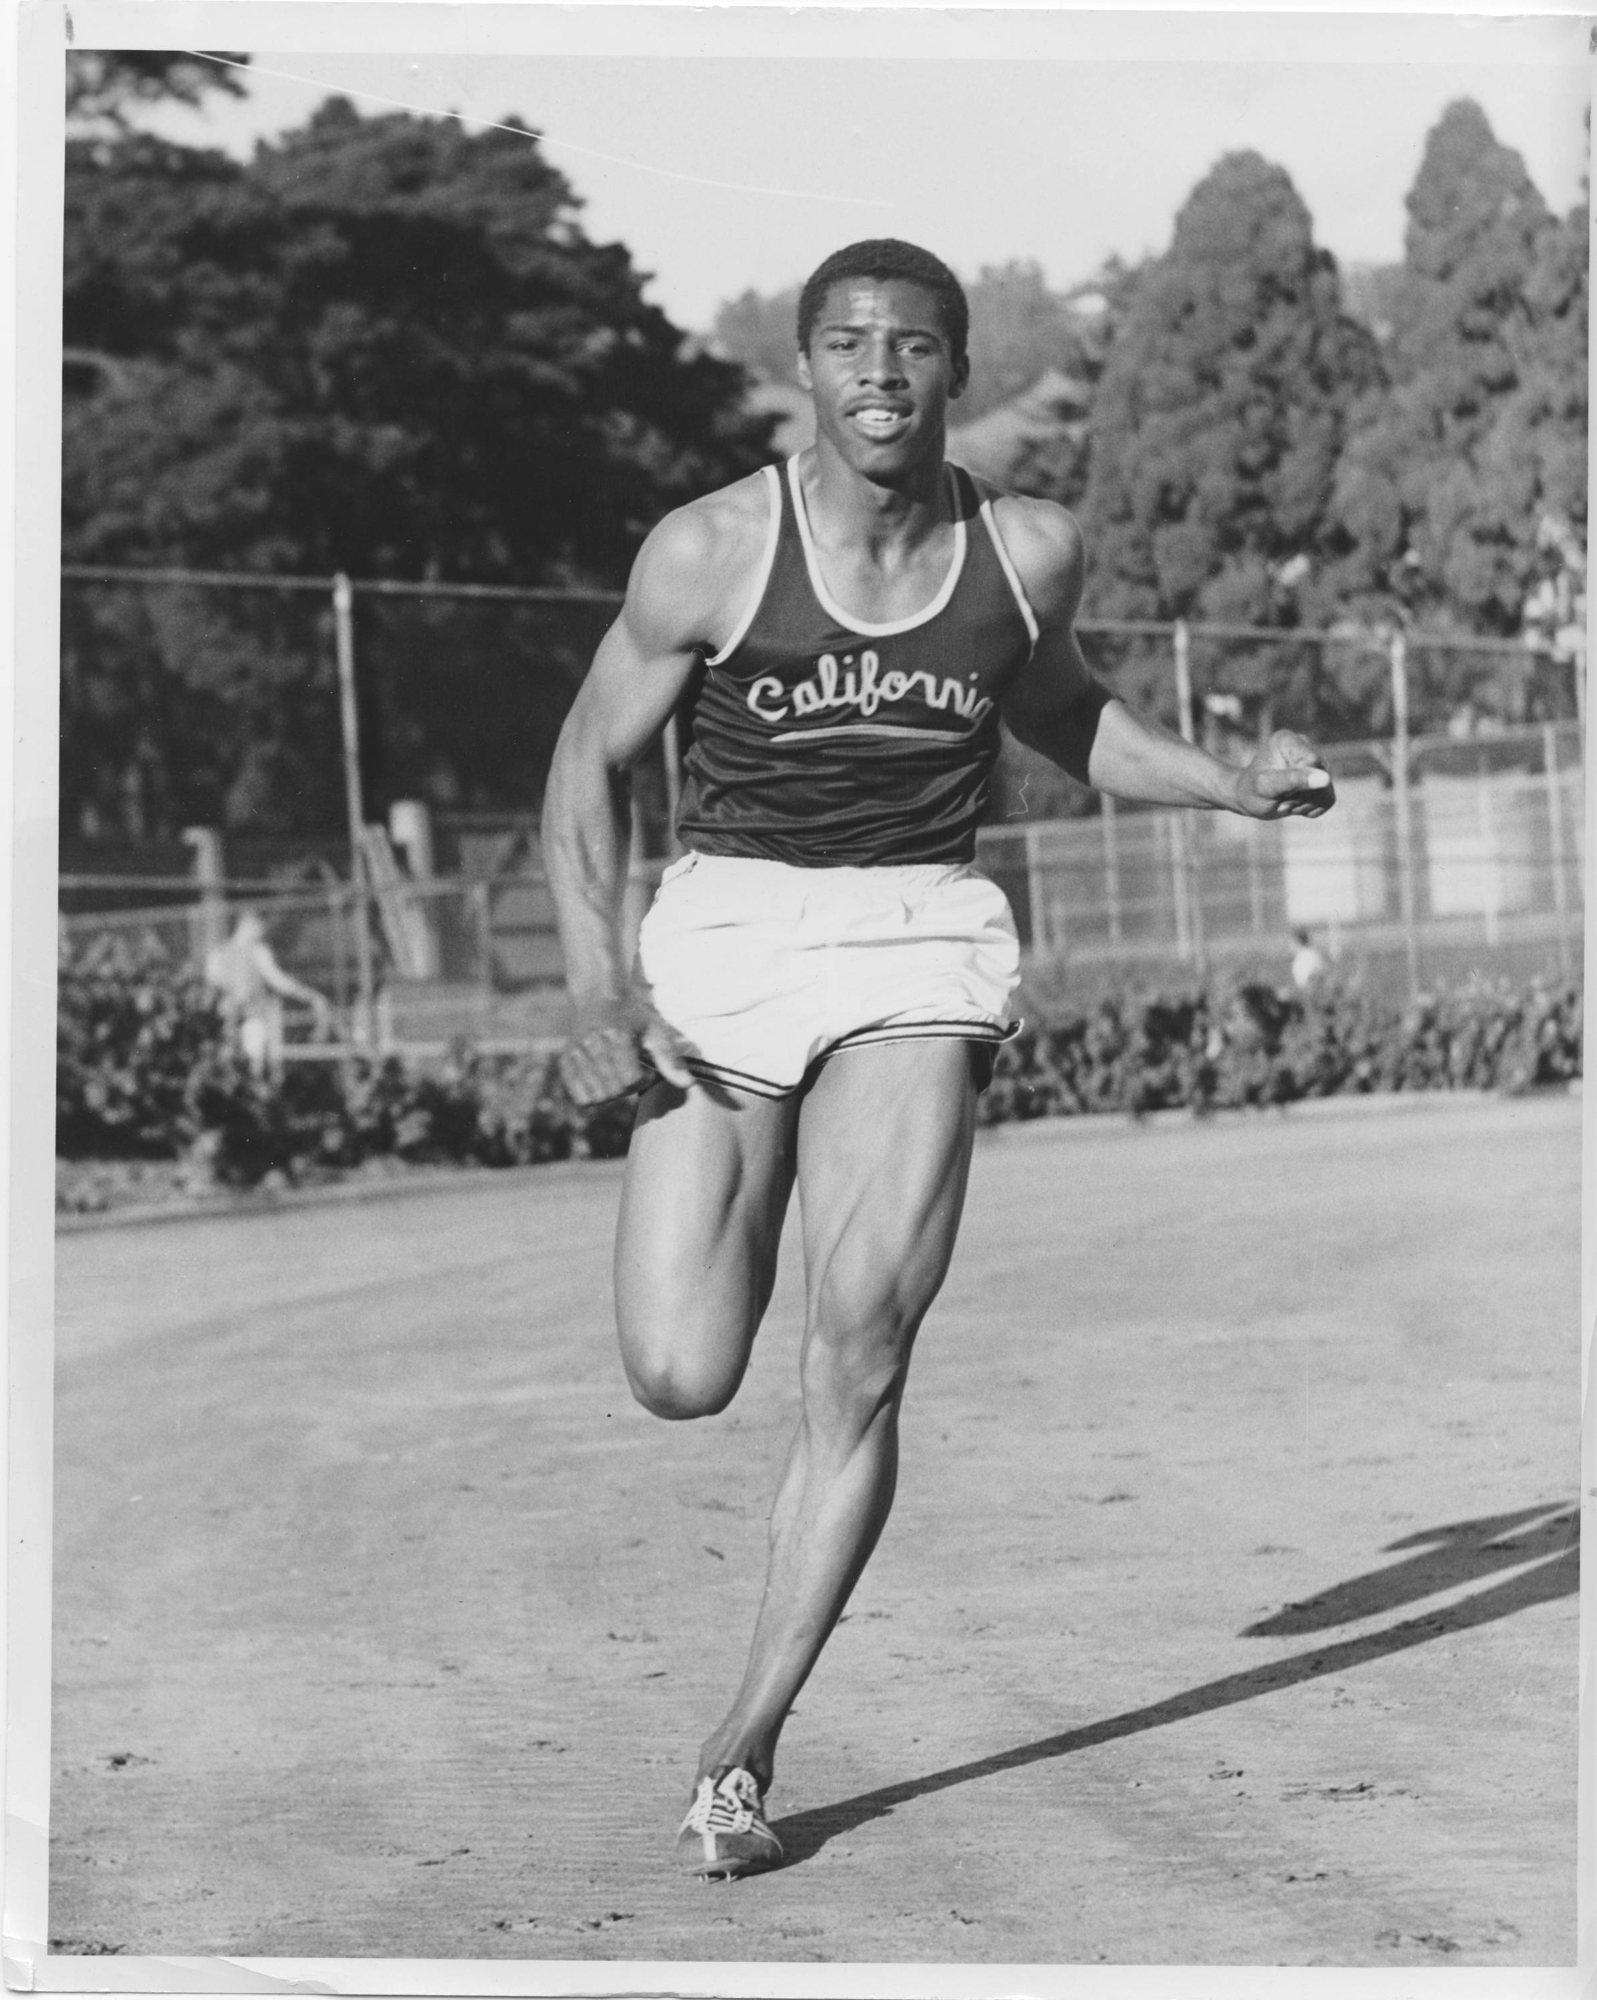 A man runs on a track with the word "California" written on his shirt.